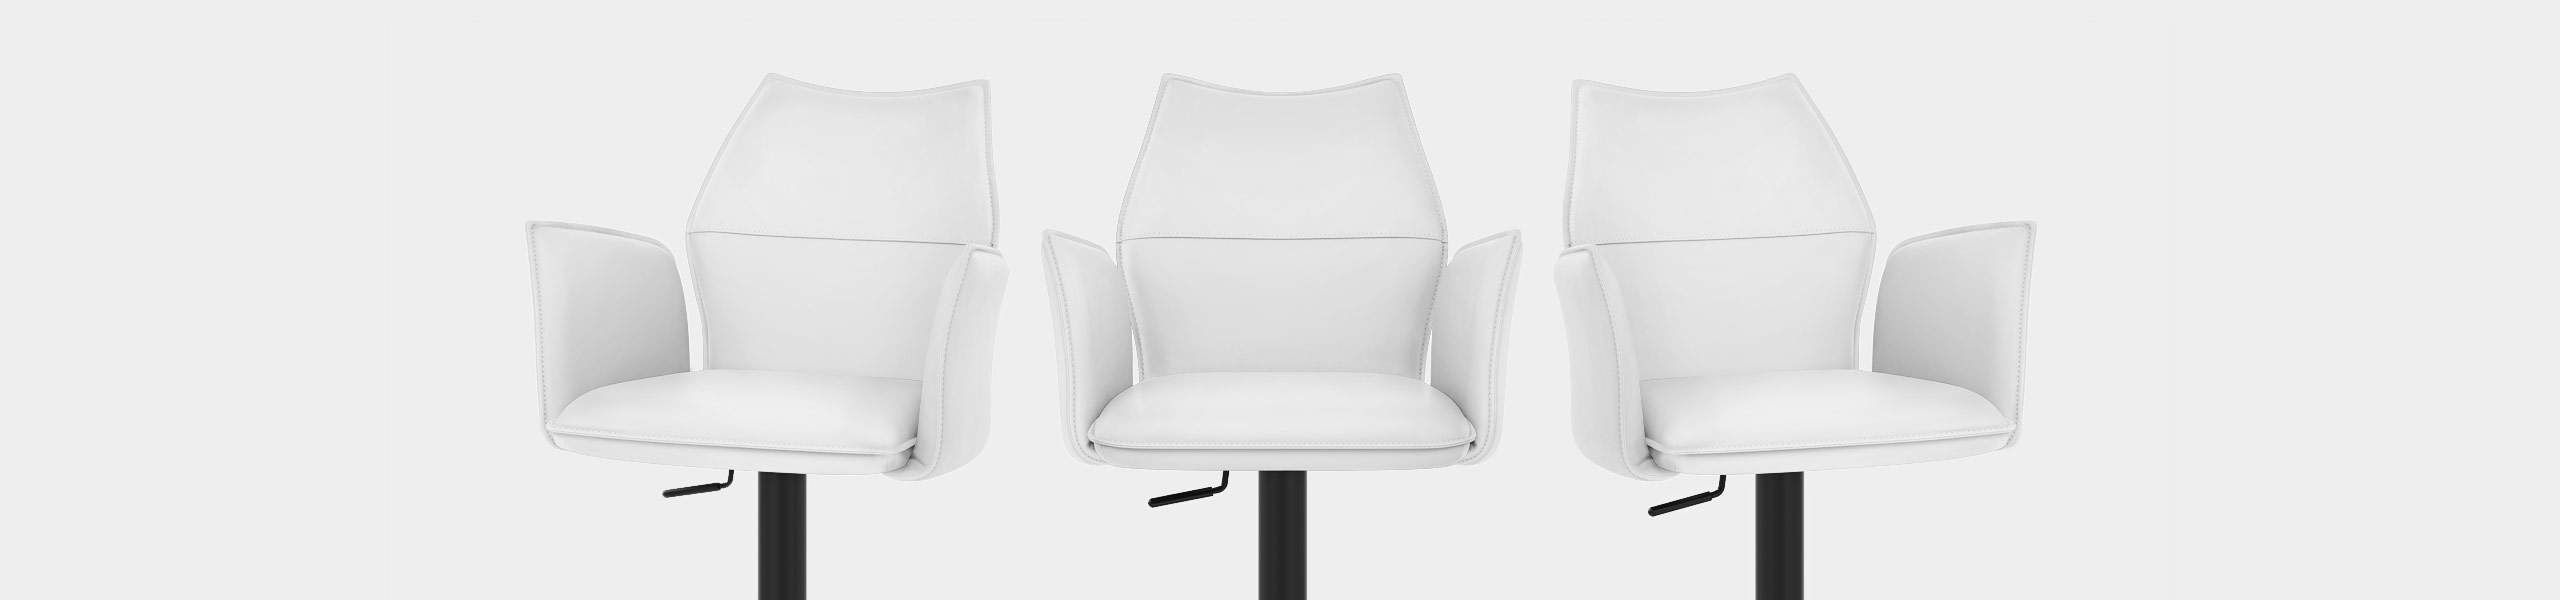 Ava Bar Stool White With Arms Video Banner